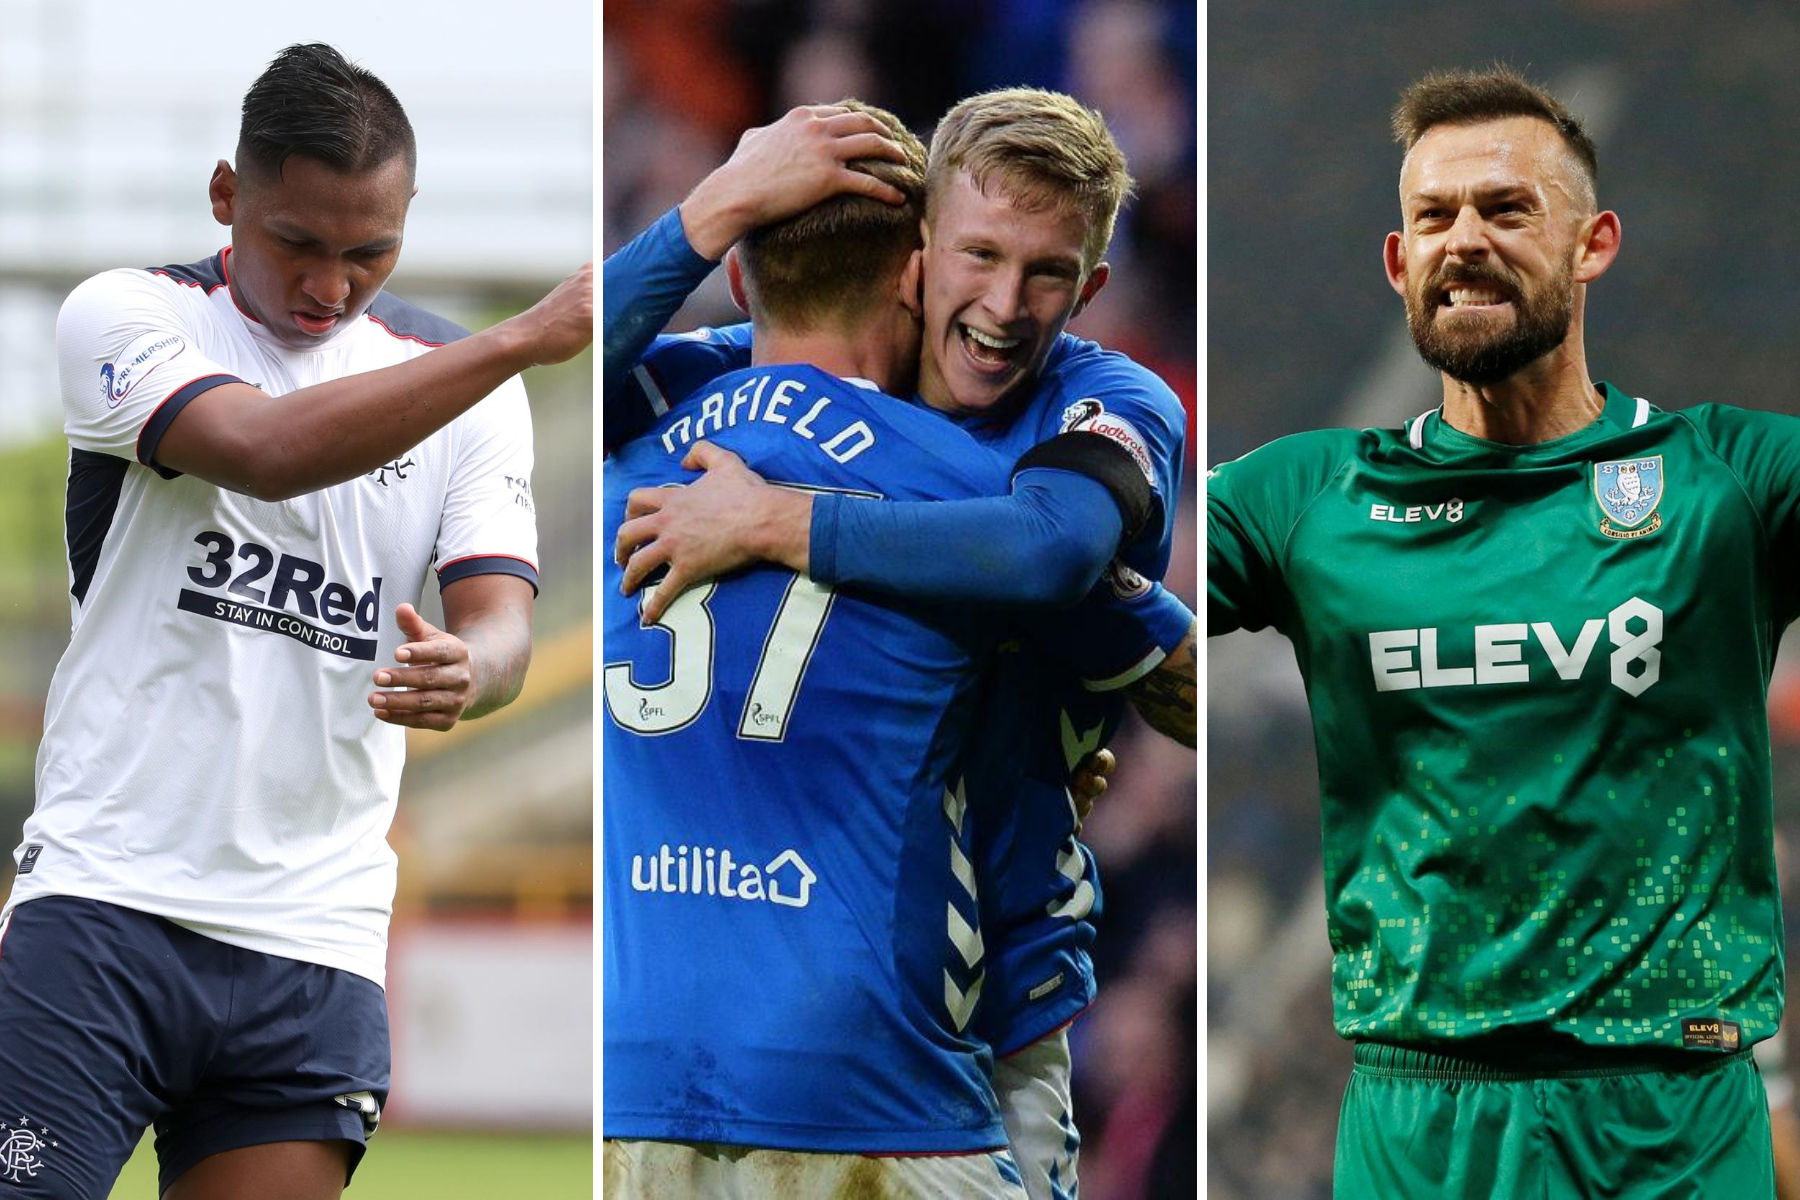 Scottish transfer news as it happened: Celtic 'in talks' with Lyle Taylor | Steven Fletcher move OFF? Rangers' Morelos latest